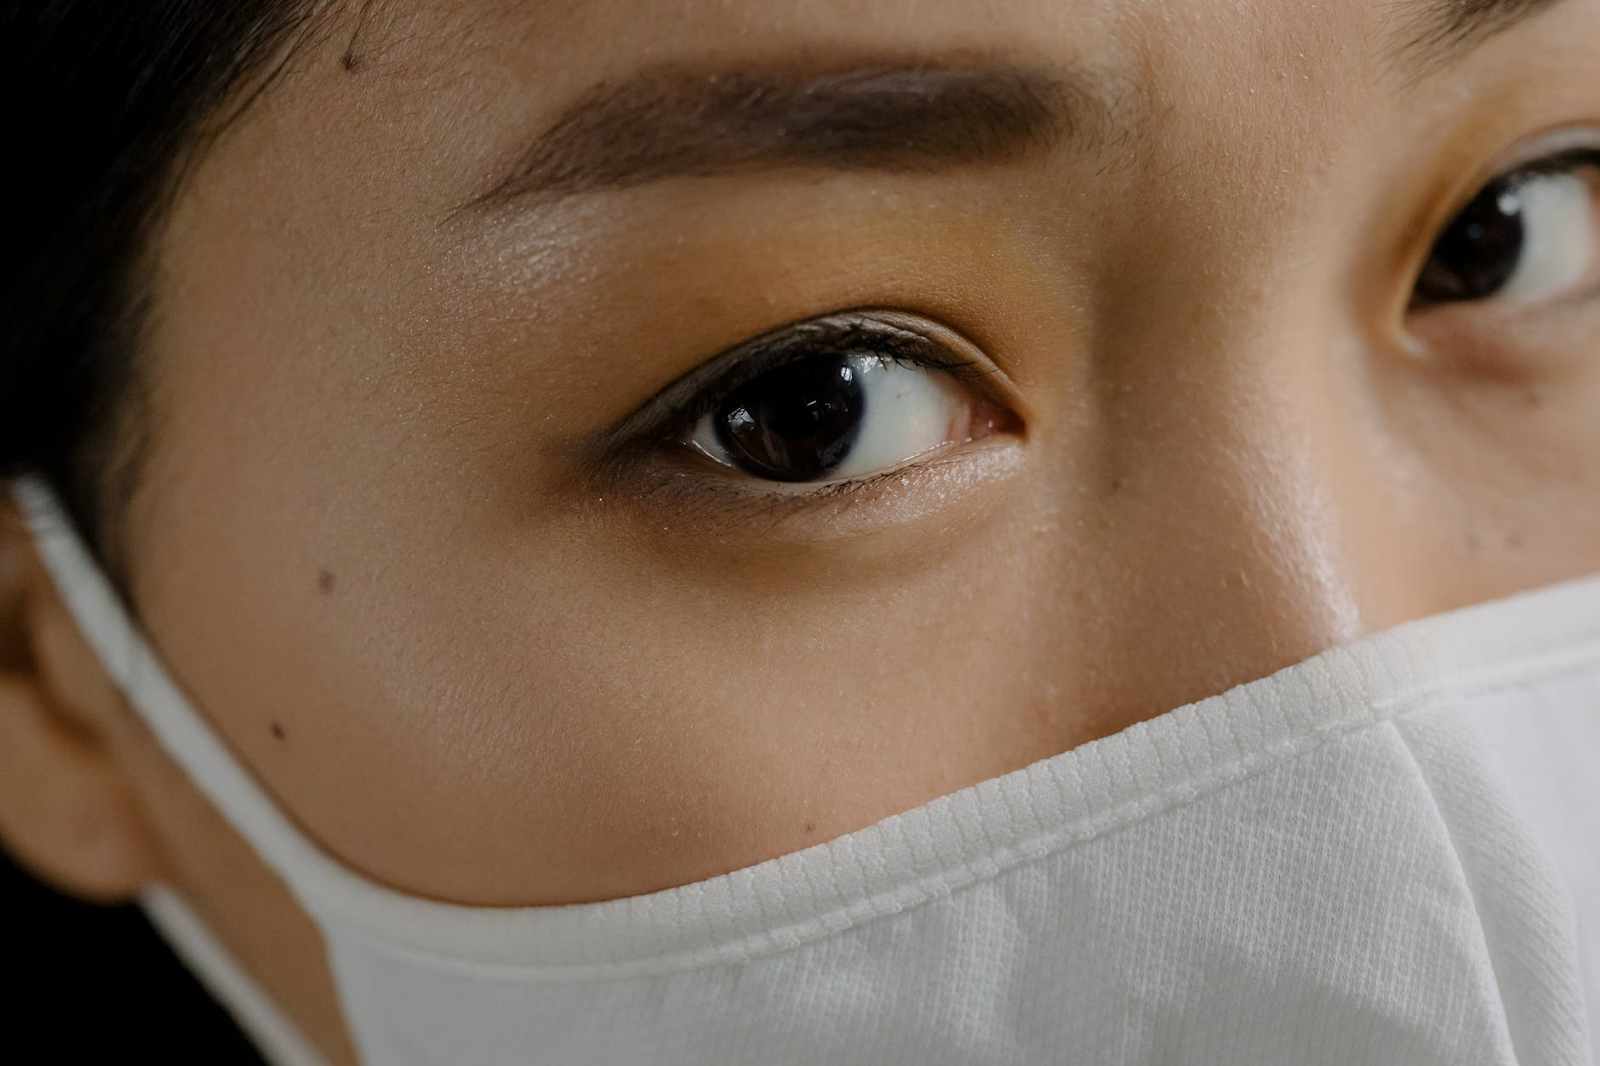 How to Emphasize Eyes When Wearing a Mask: 7 Makeup Tips